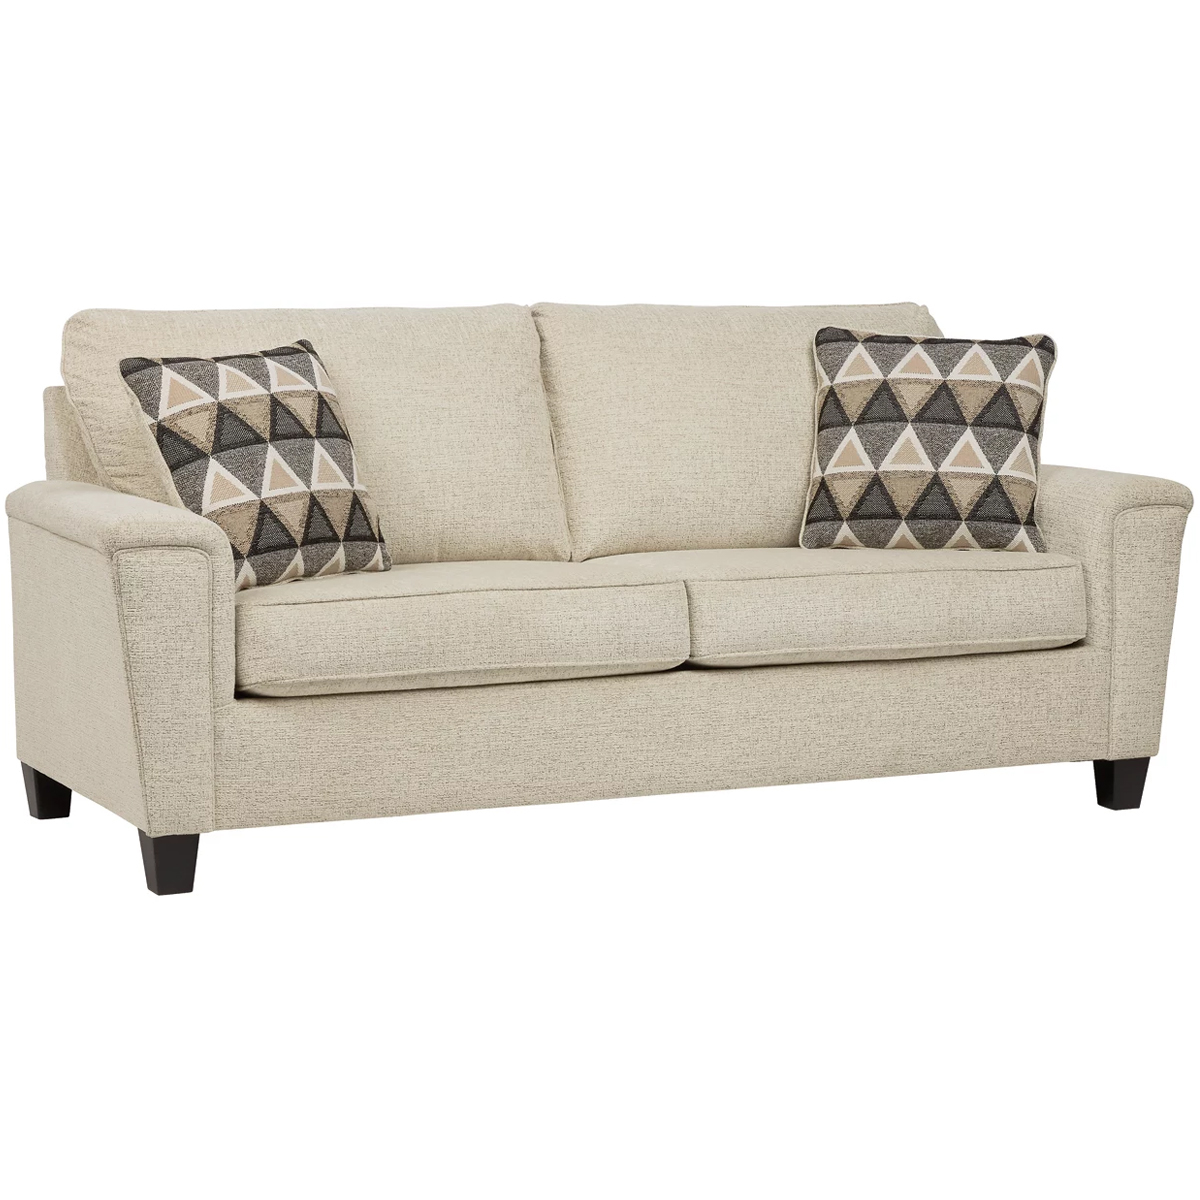 Picture of ABINGER NATURAL SOFA